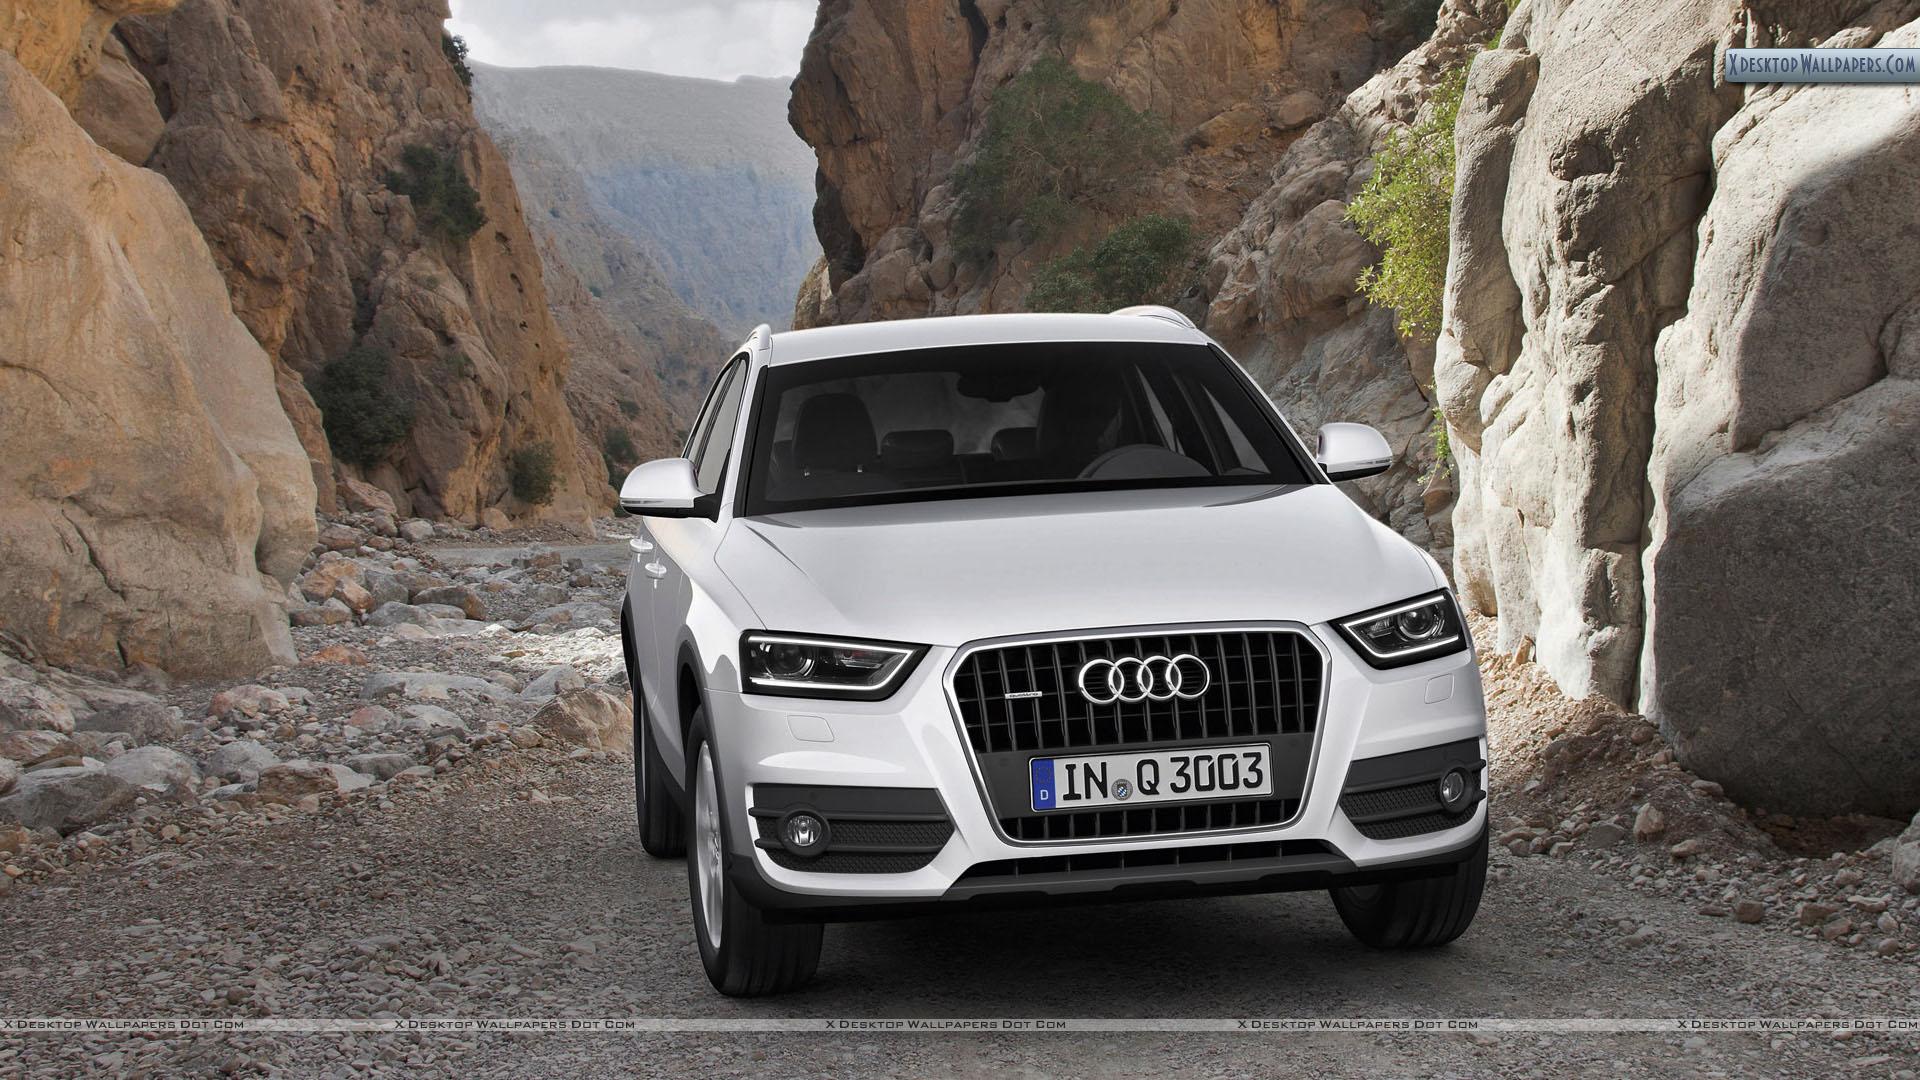 Audi Q3 White Color In a Valley Wallpaper